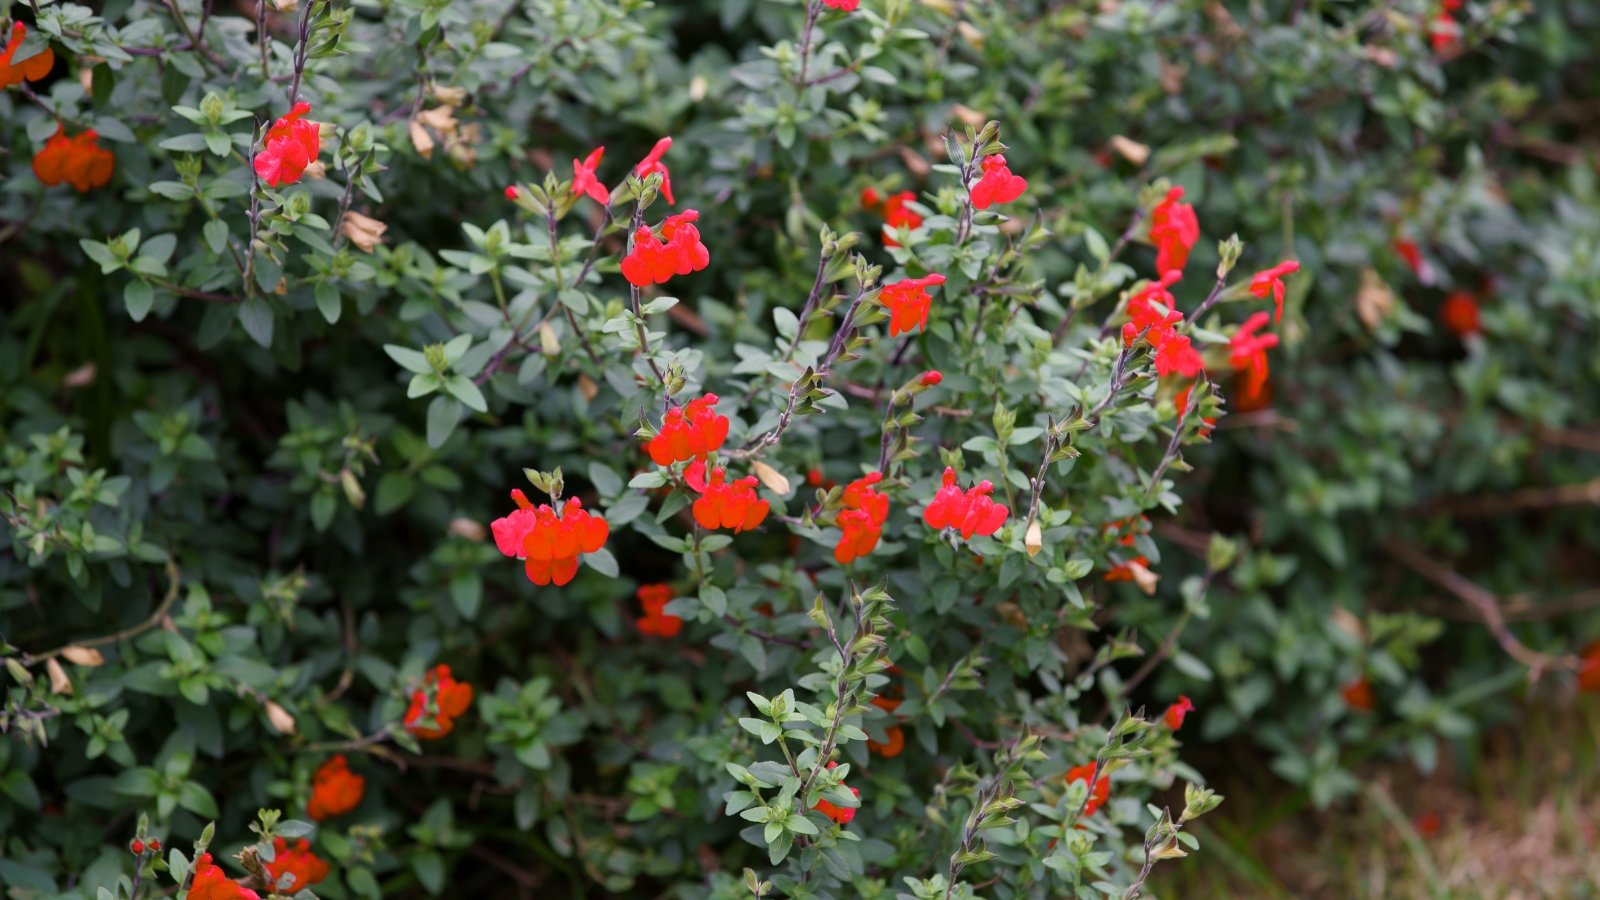 Autumn Sage features aromatic, lance-shaped leaves with scalloped edges and vibrant tubular flowers in shades of red.